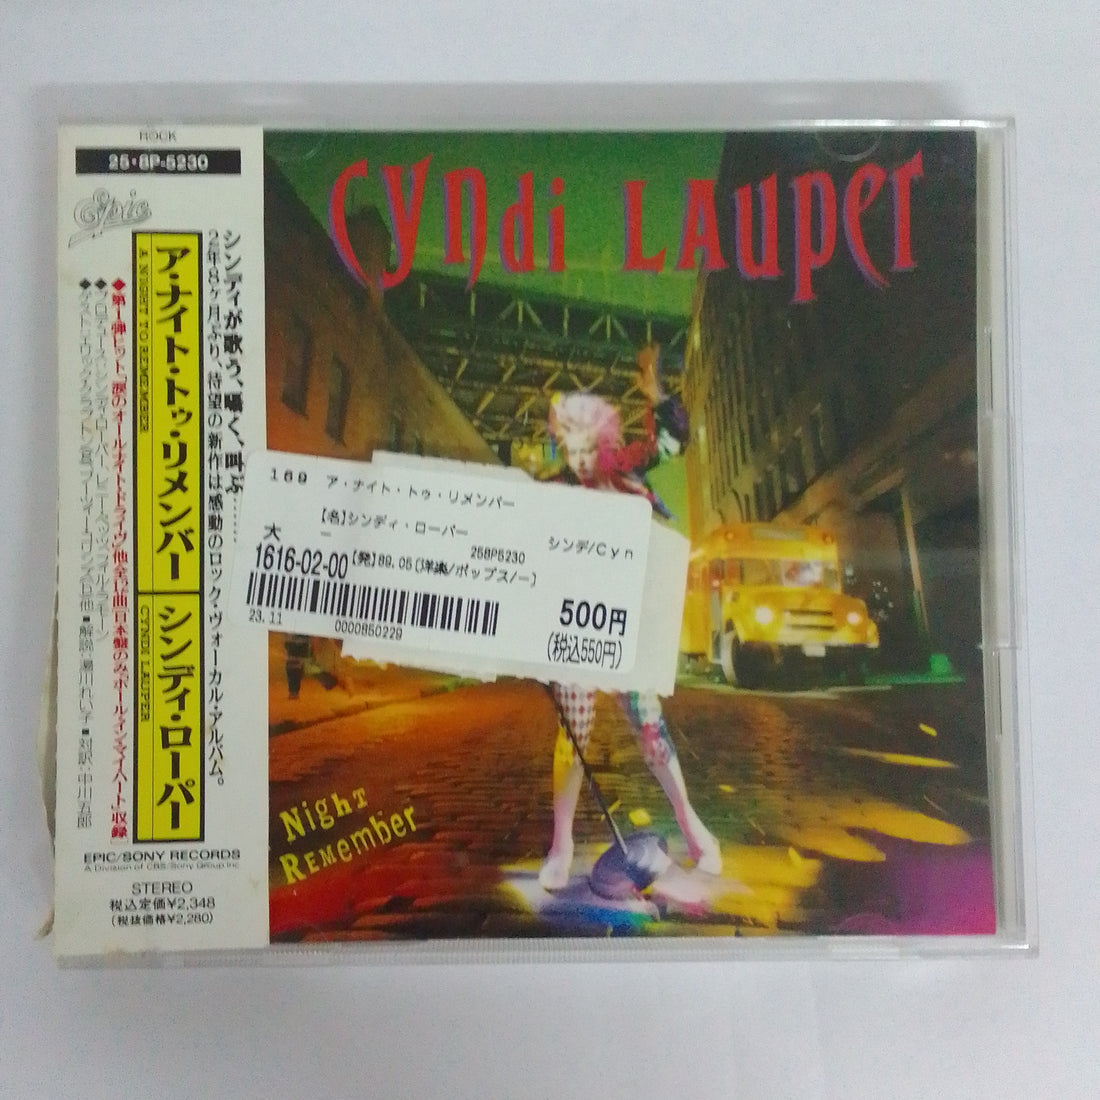 Cyndi Lauper - A Night To Remember (CD) (NM or M-)